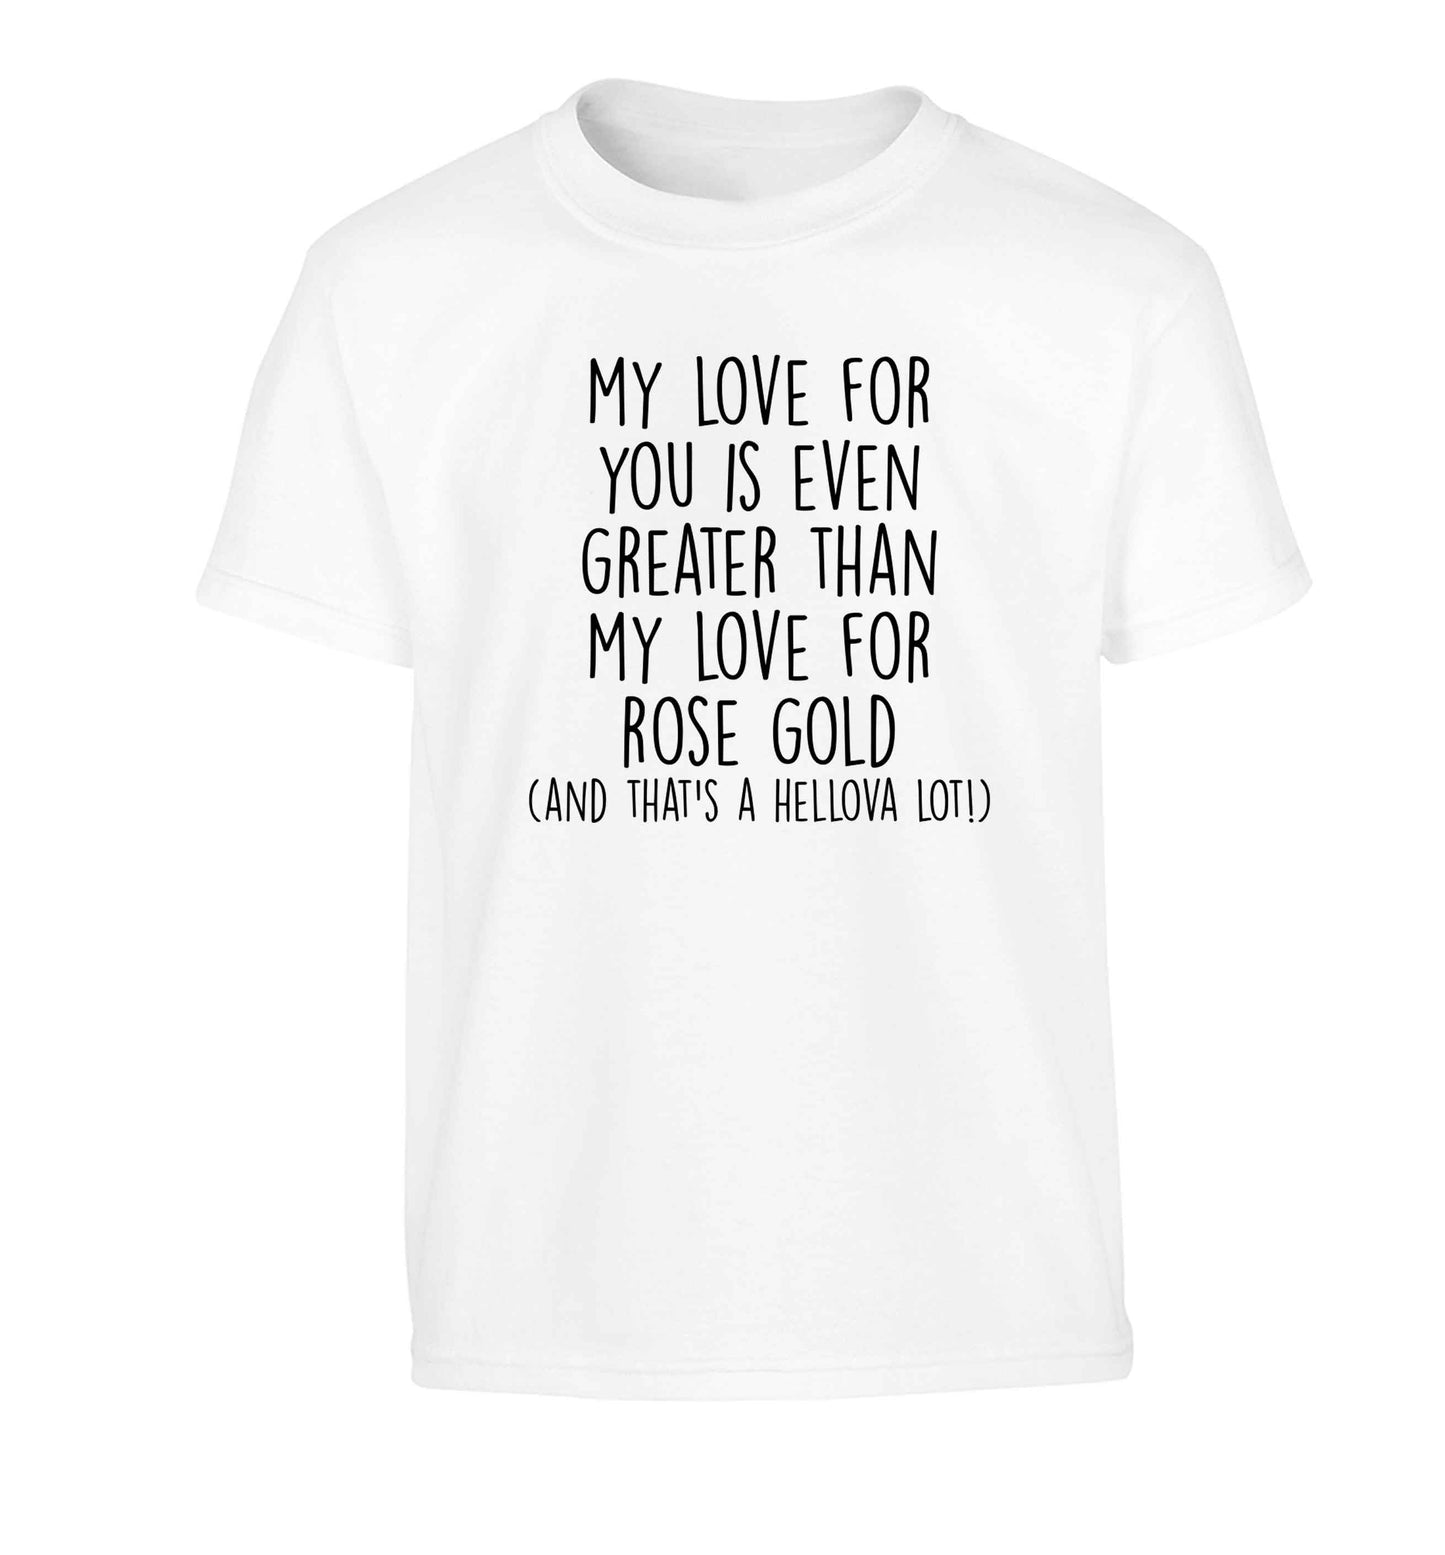 My love for you is even greater than my love for rose gold (and that's a hellova lot) Children's white Tshirt 12-13 Years